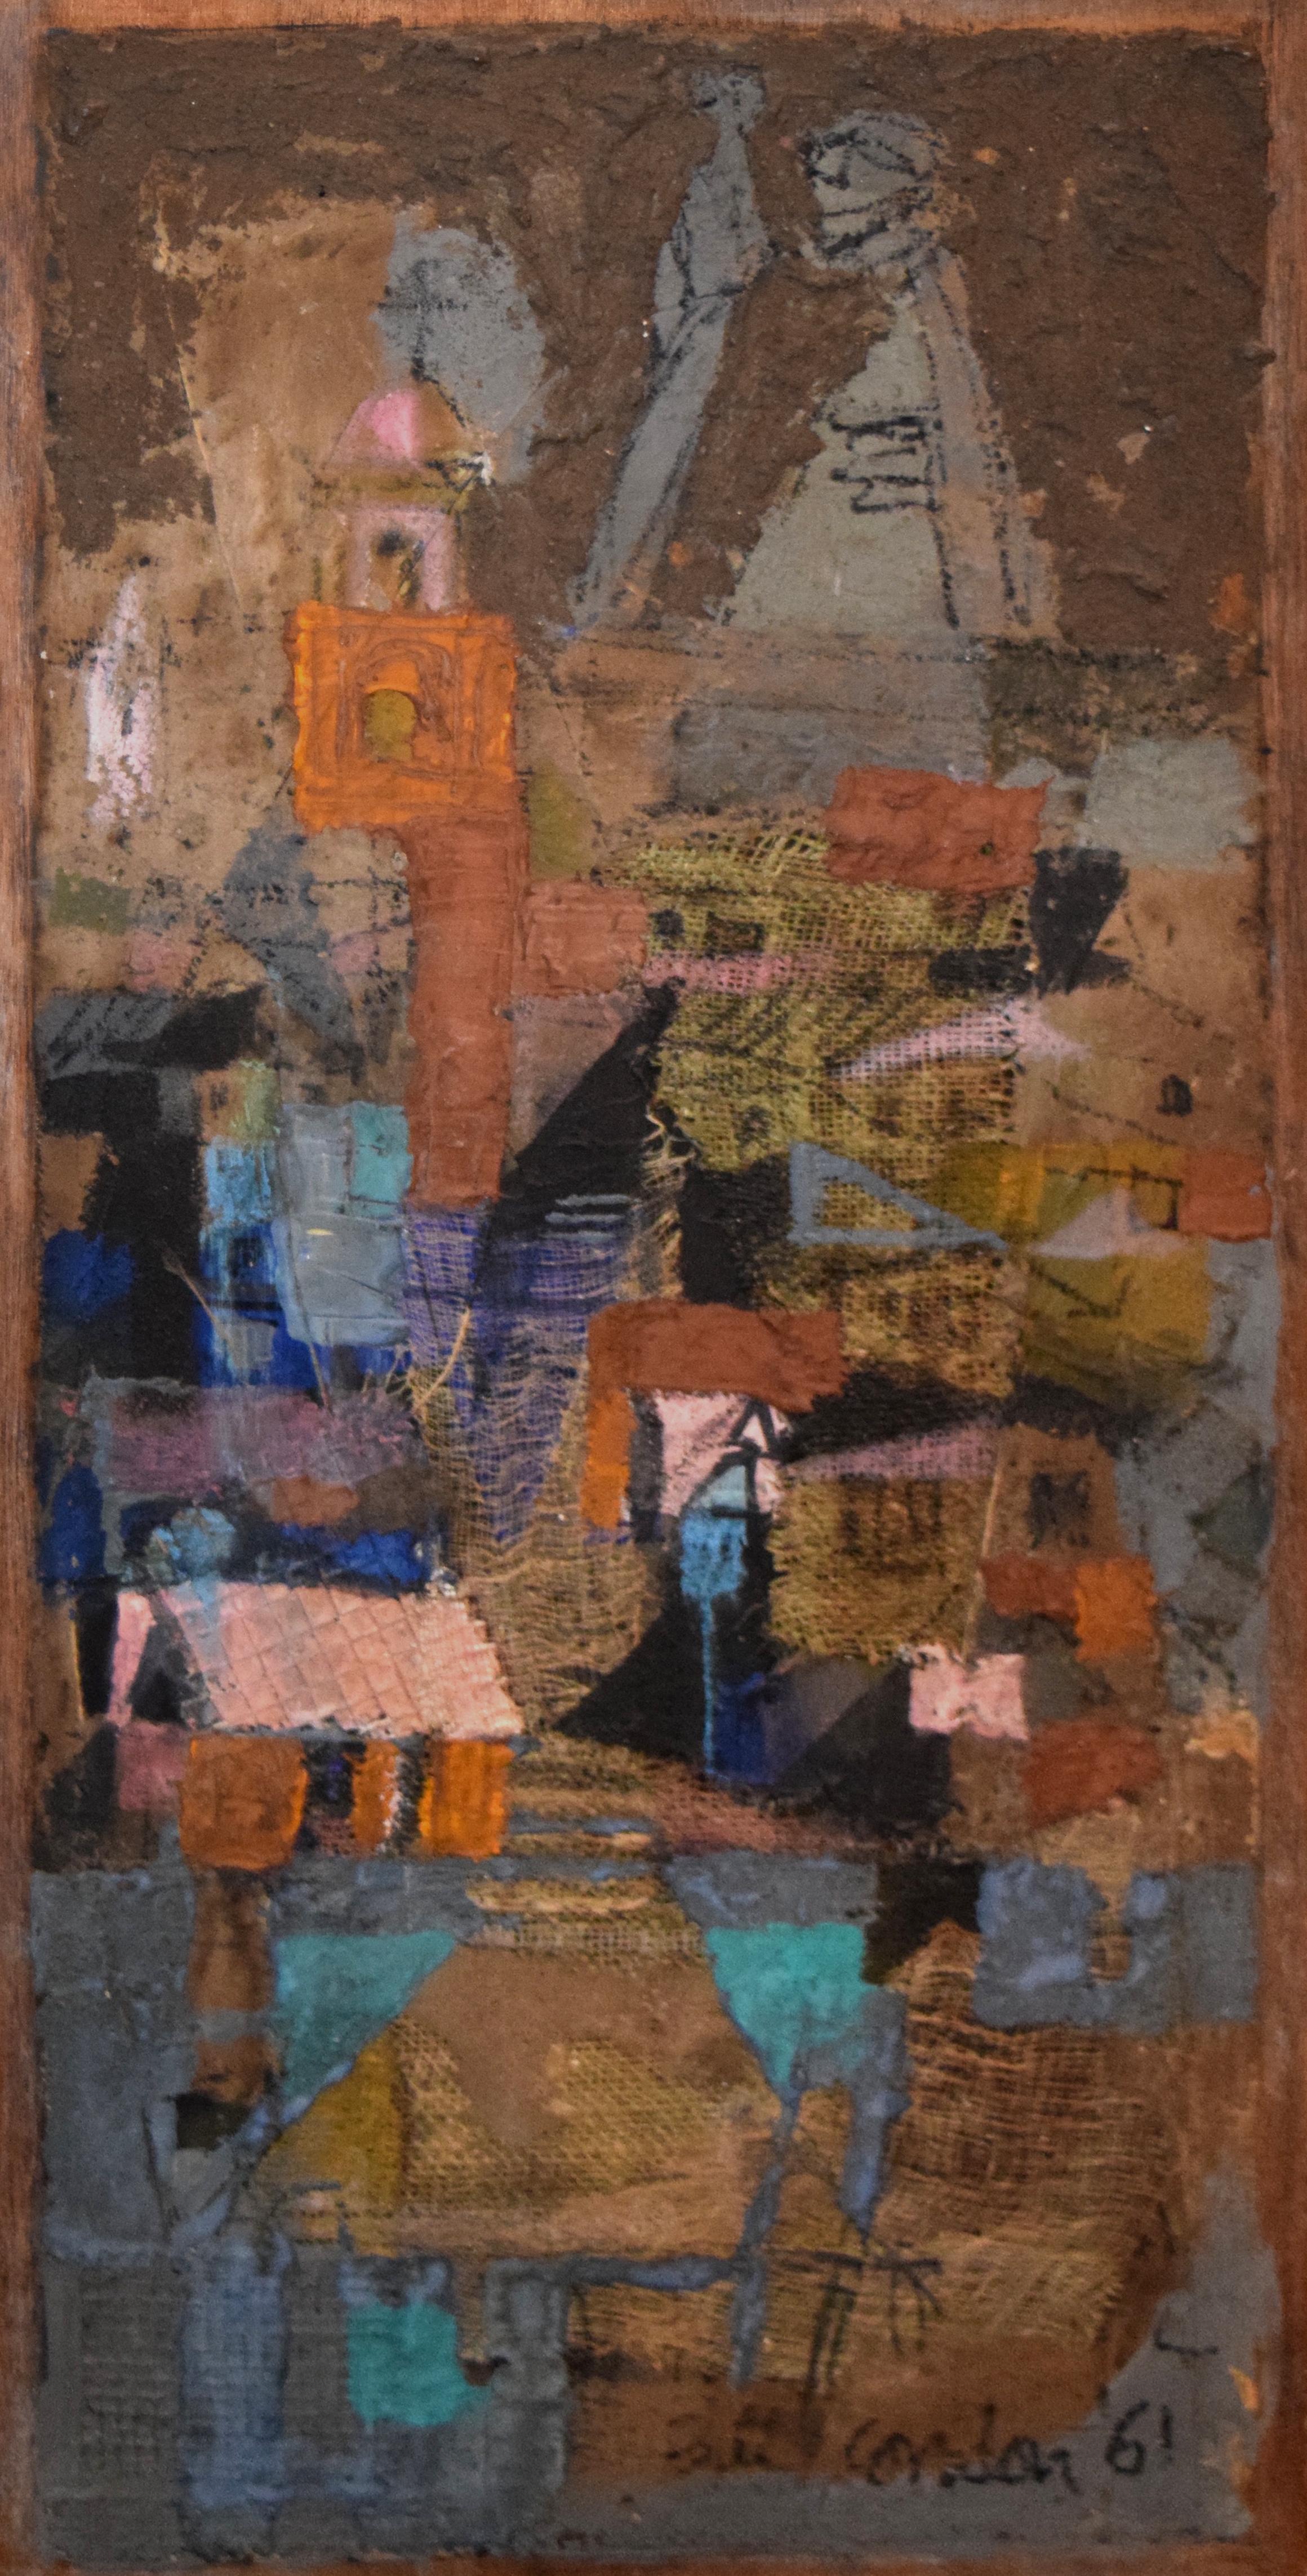 Bill Condon Landscape Painting - "Janitzio" Abstract Textured Mixed Media Work